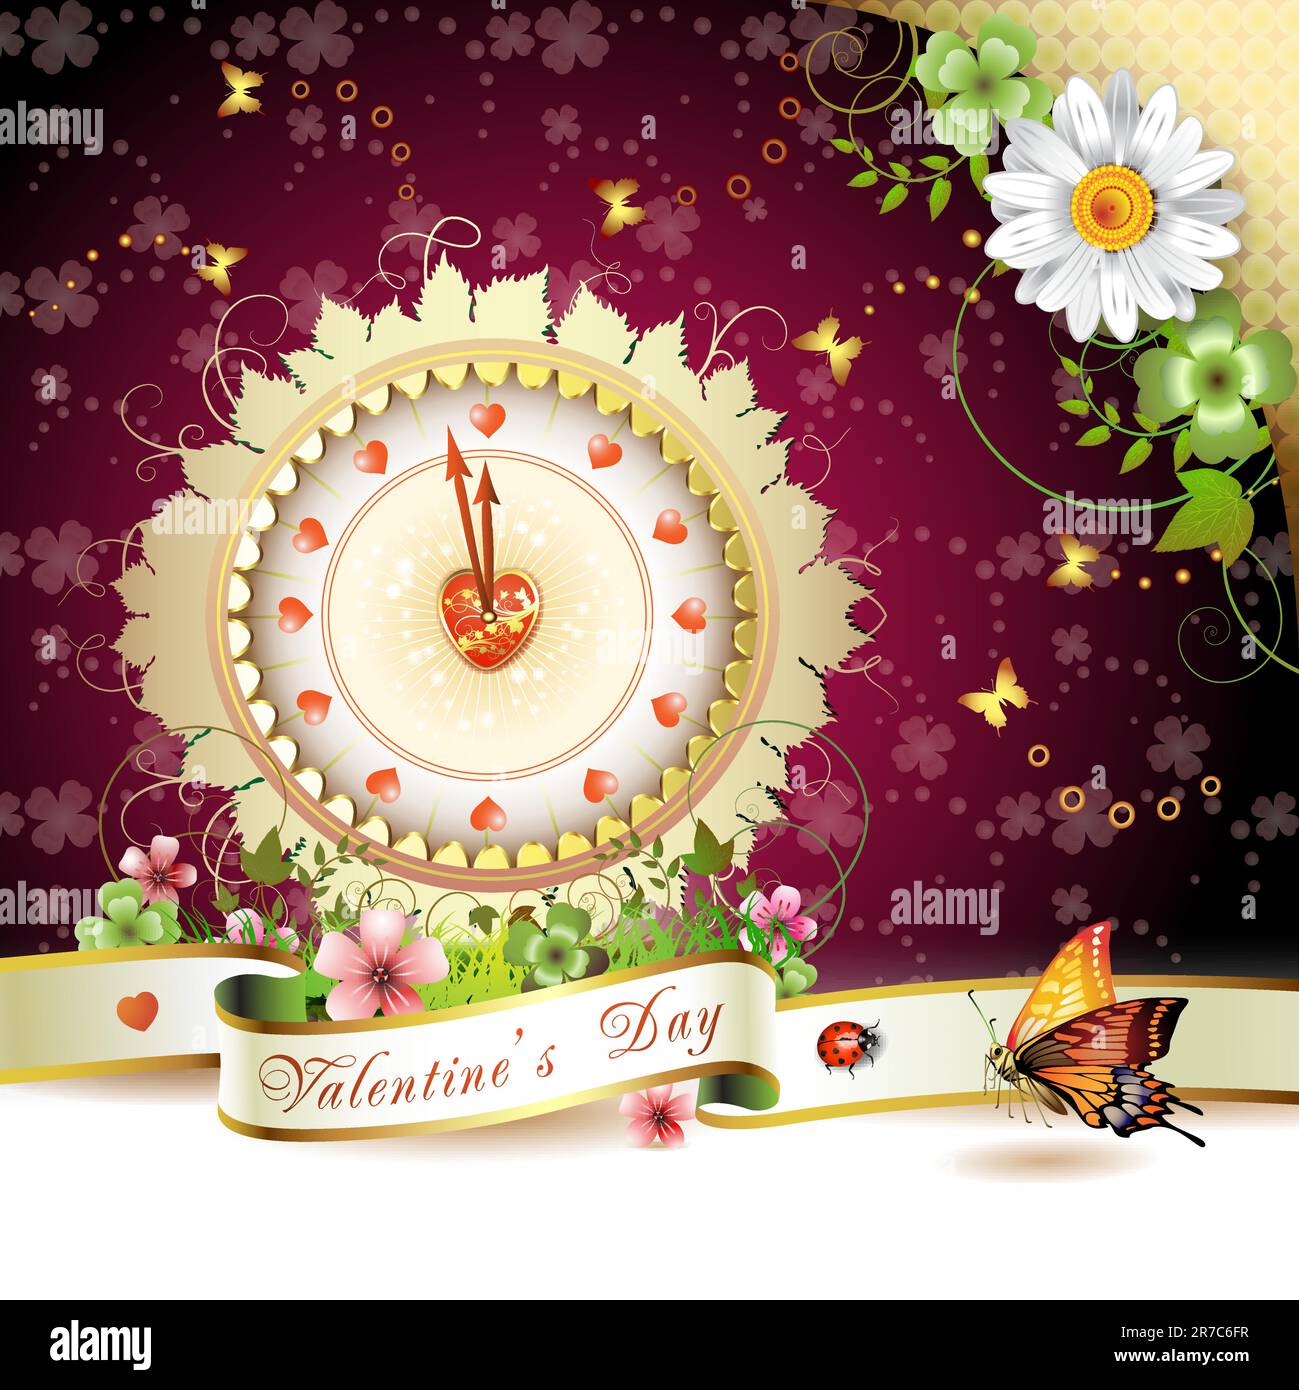 Clock design with Valentine's day theme over springtime background Stock Vector